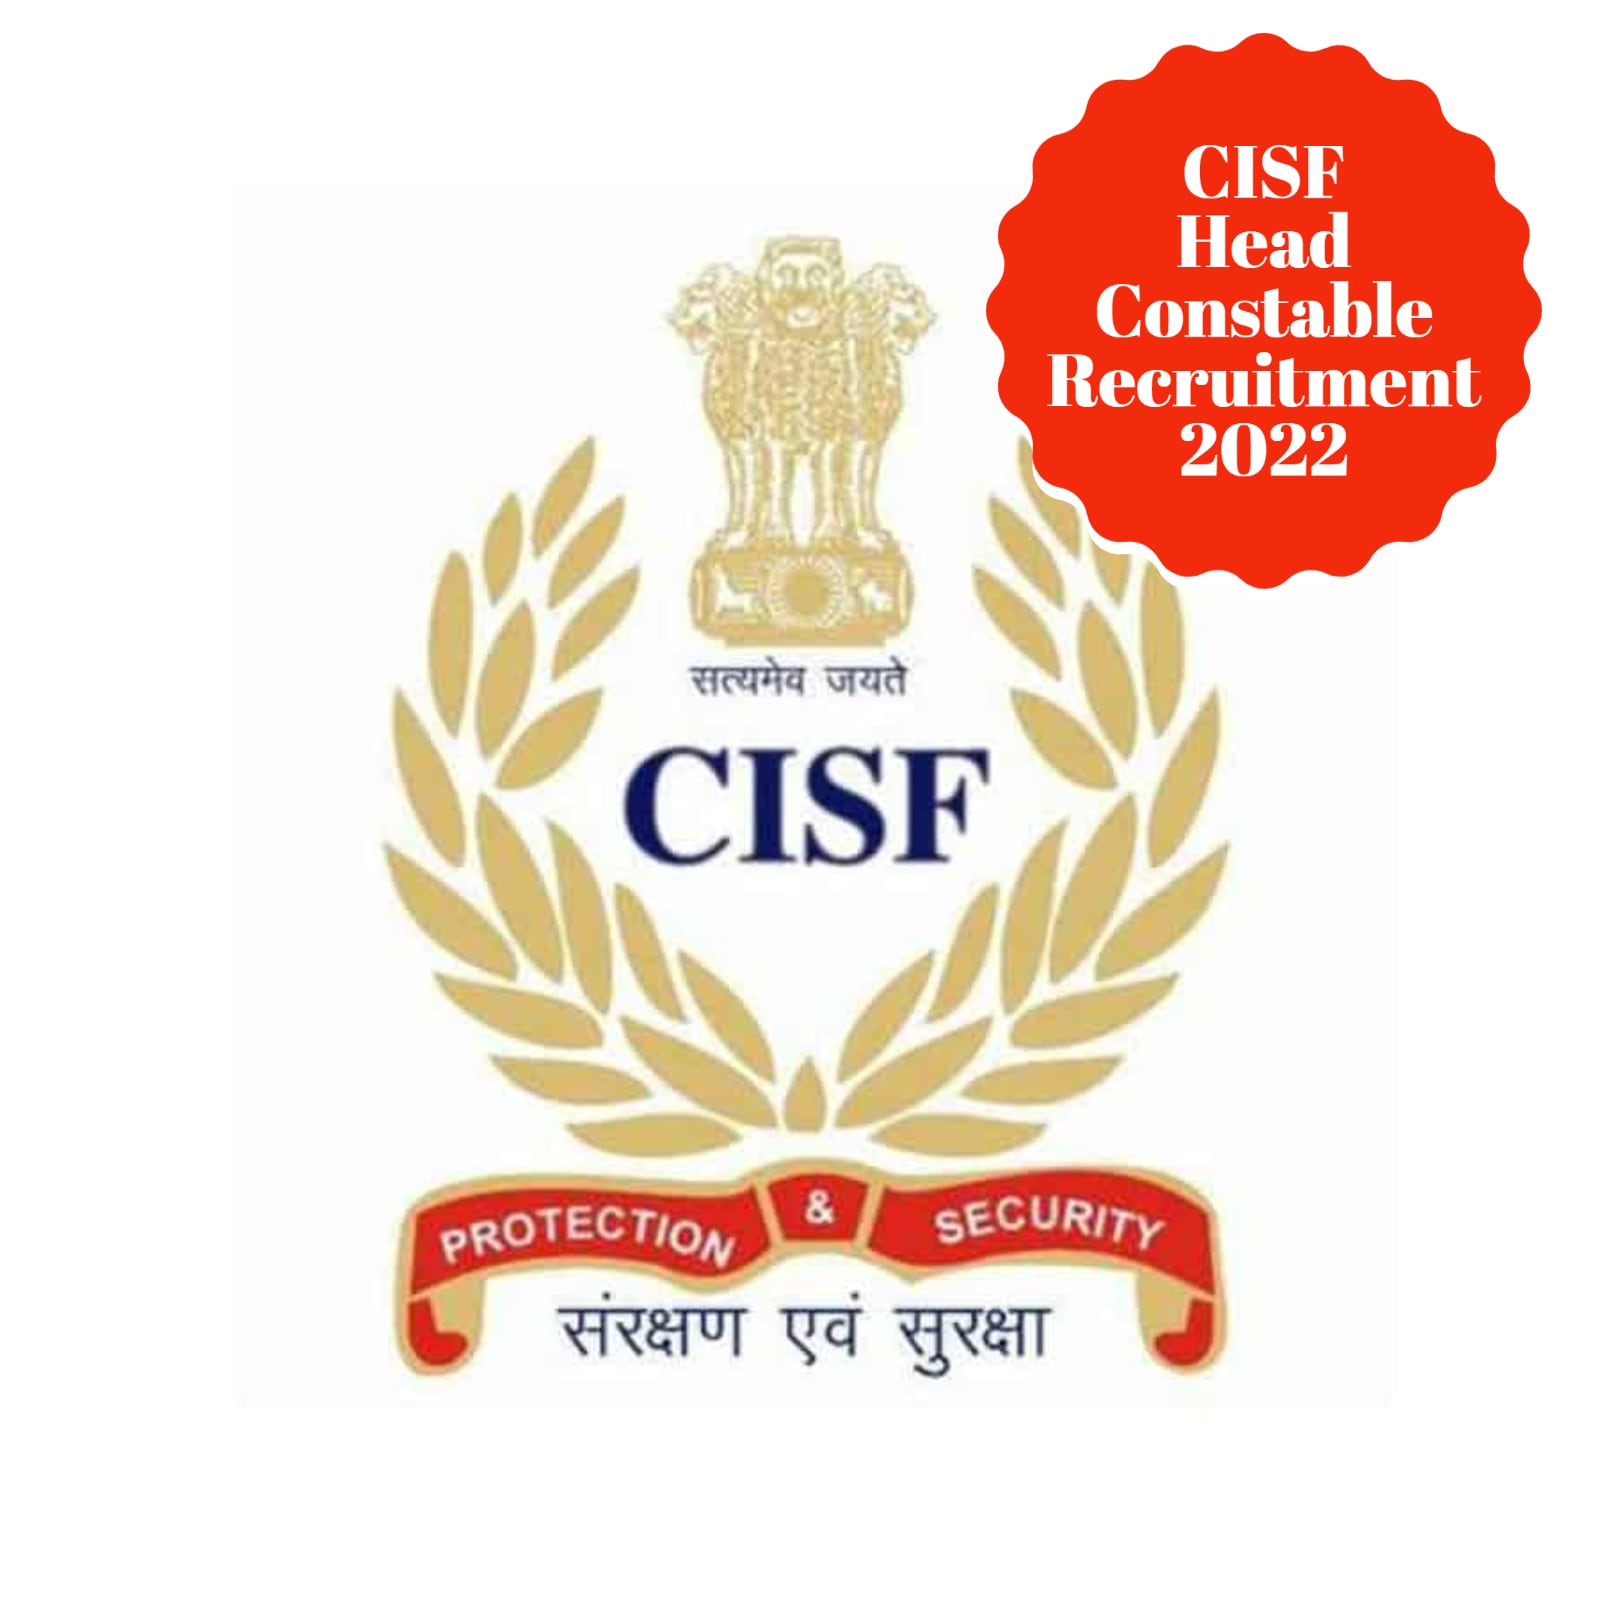 CISF c009 Previous Years Question Papers  Latest Govt Jobs 2022